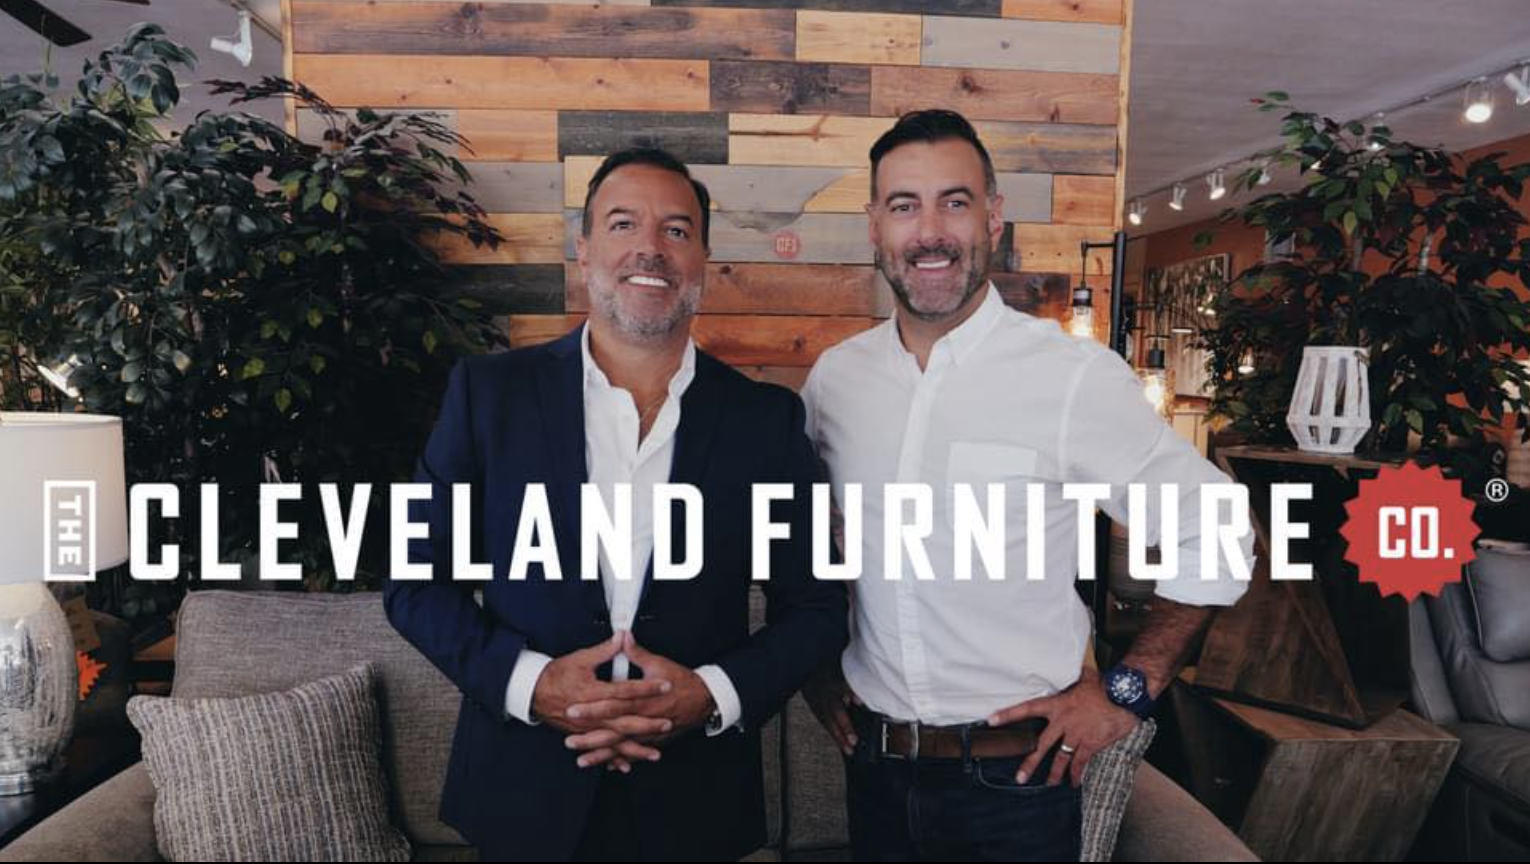 The Cleveland Furniture Co.